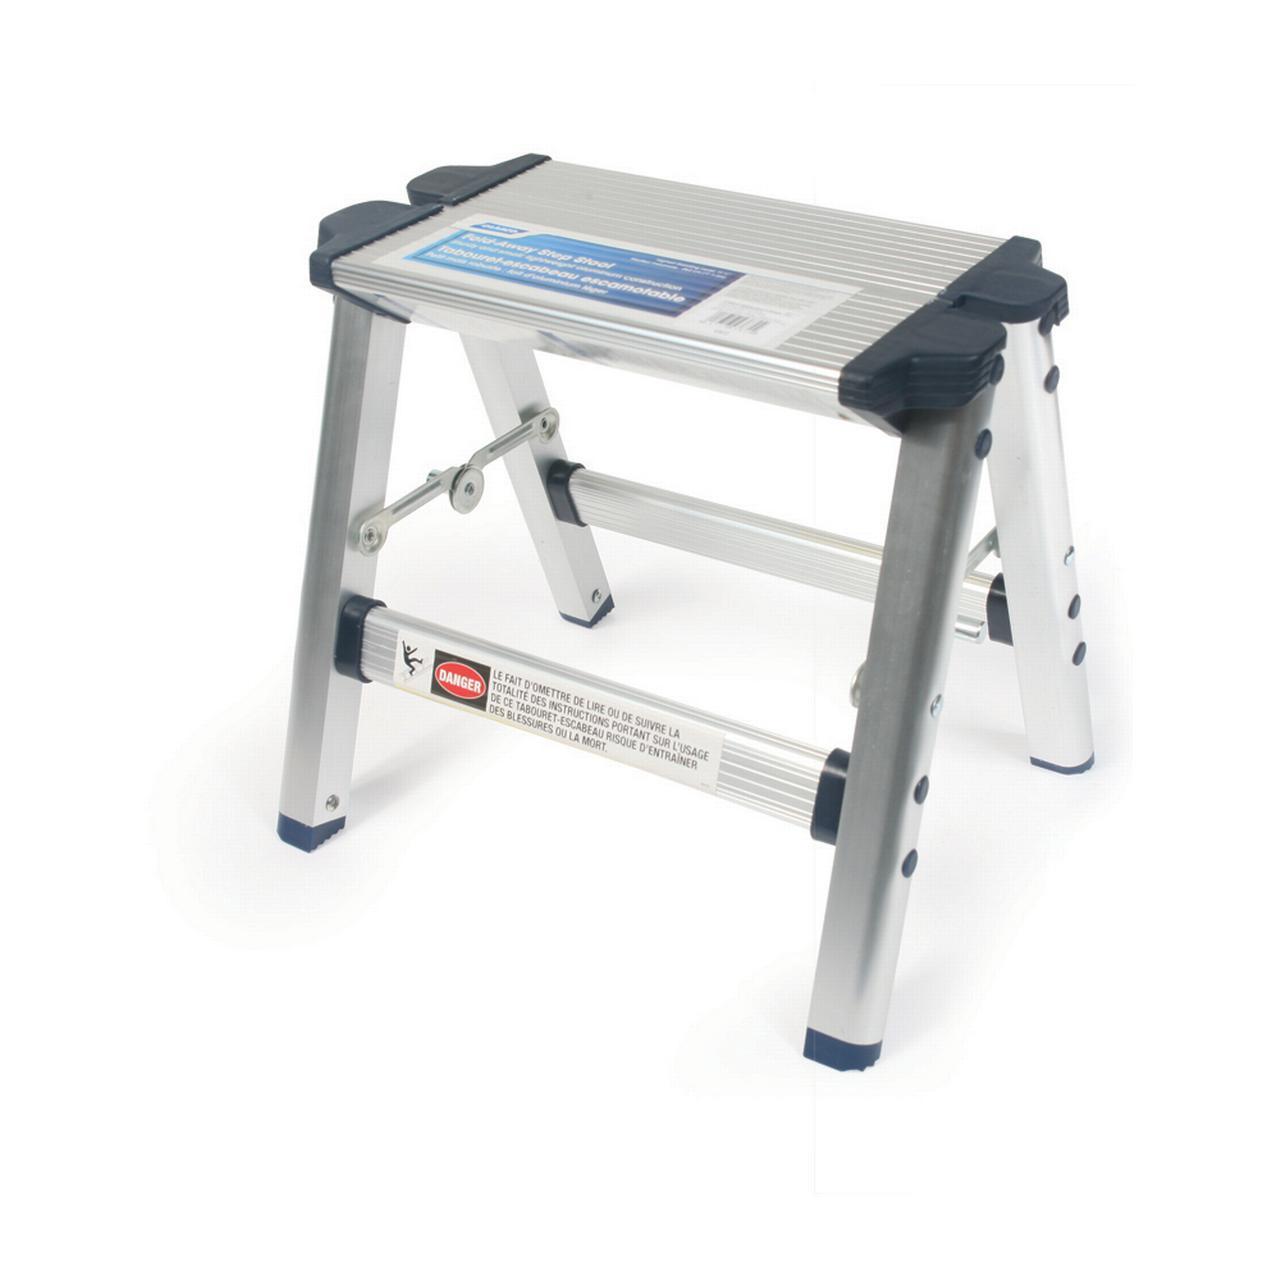 Camco Aluminum Single Step Stool | Folding with Plastic Feet | Supports Up to 200 lbs. | (43672) - image 1 of 4